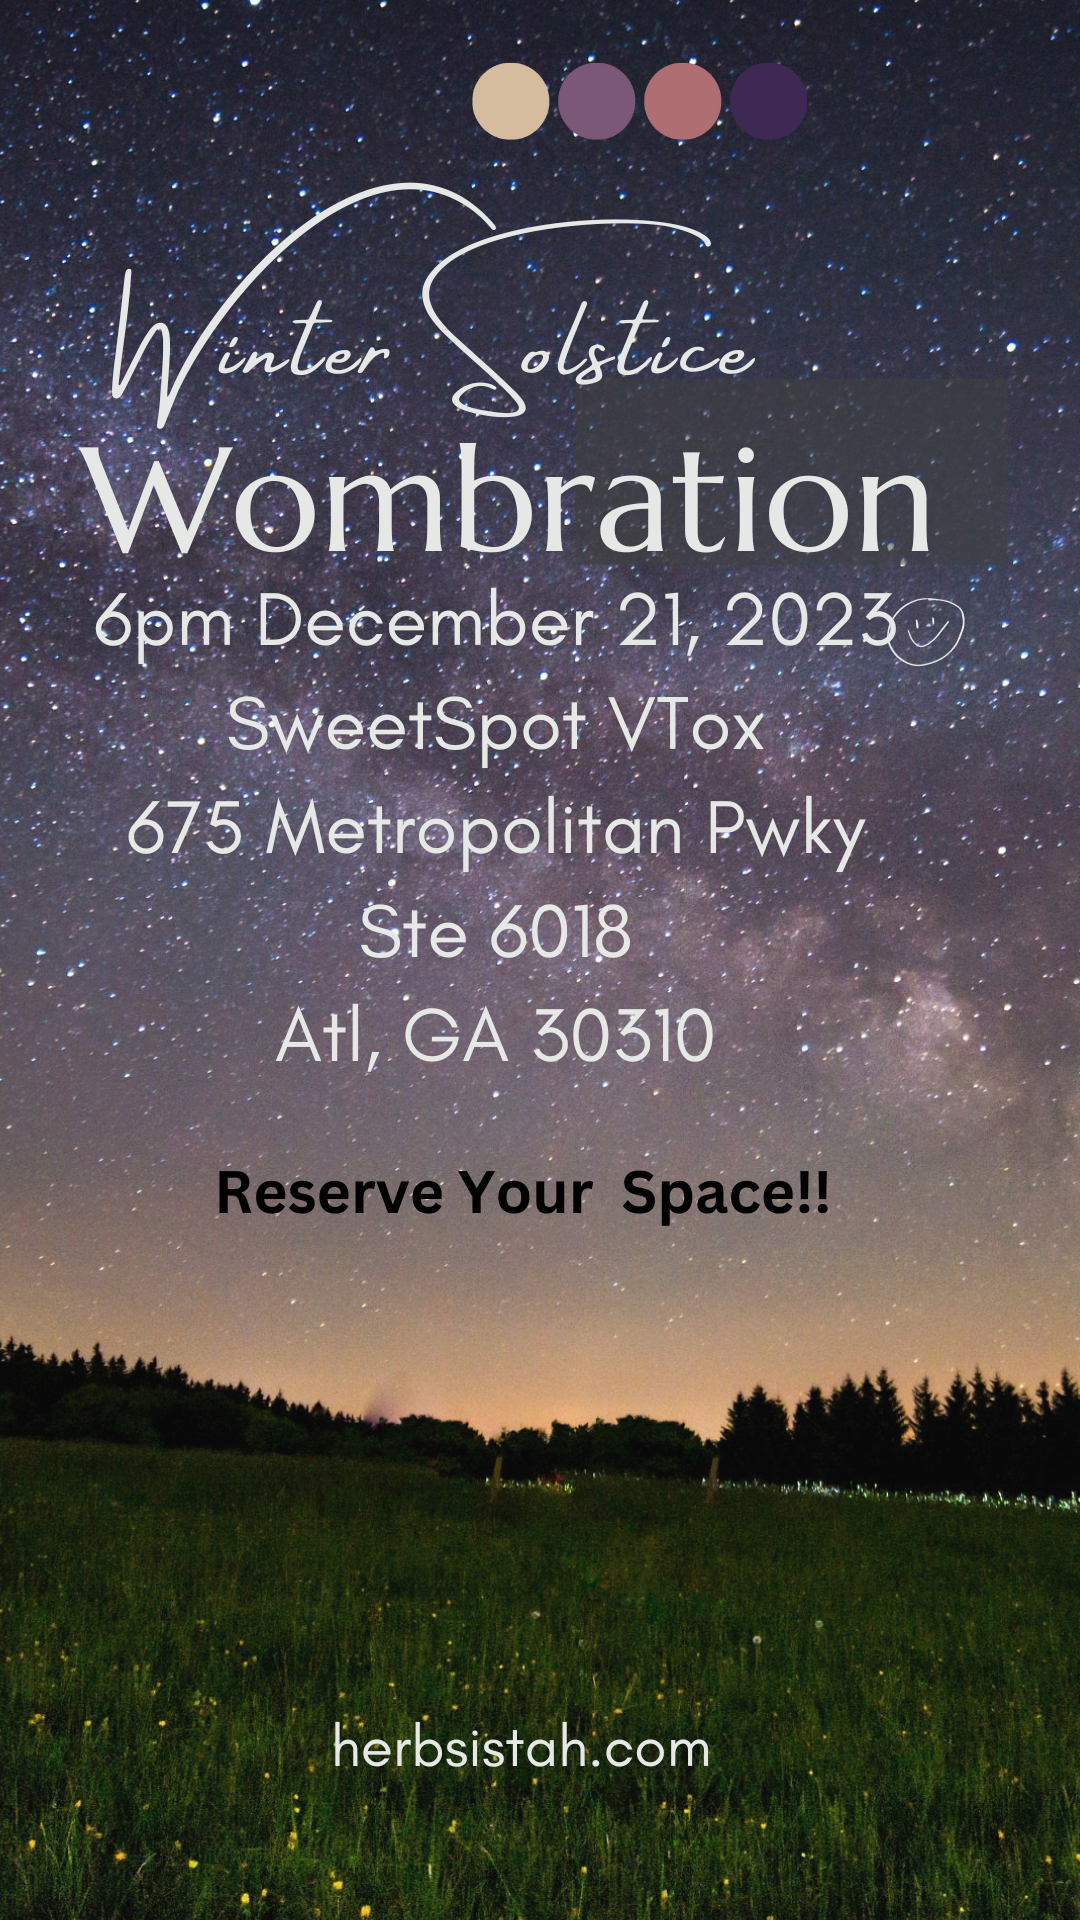 Winter Solstice Wombration - Thursday, December 21, 2023 at 6pm